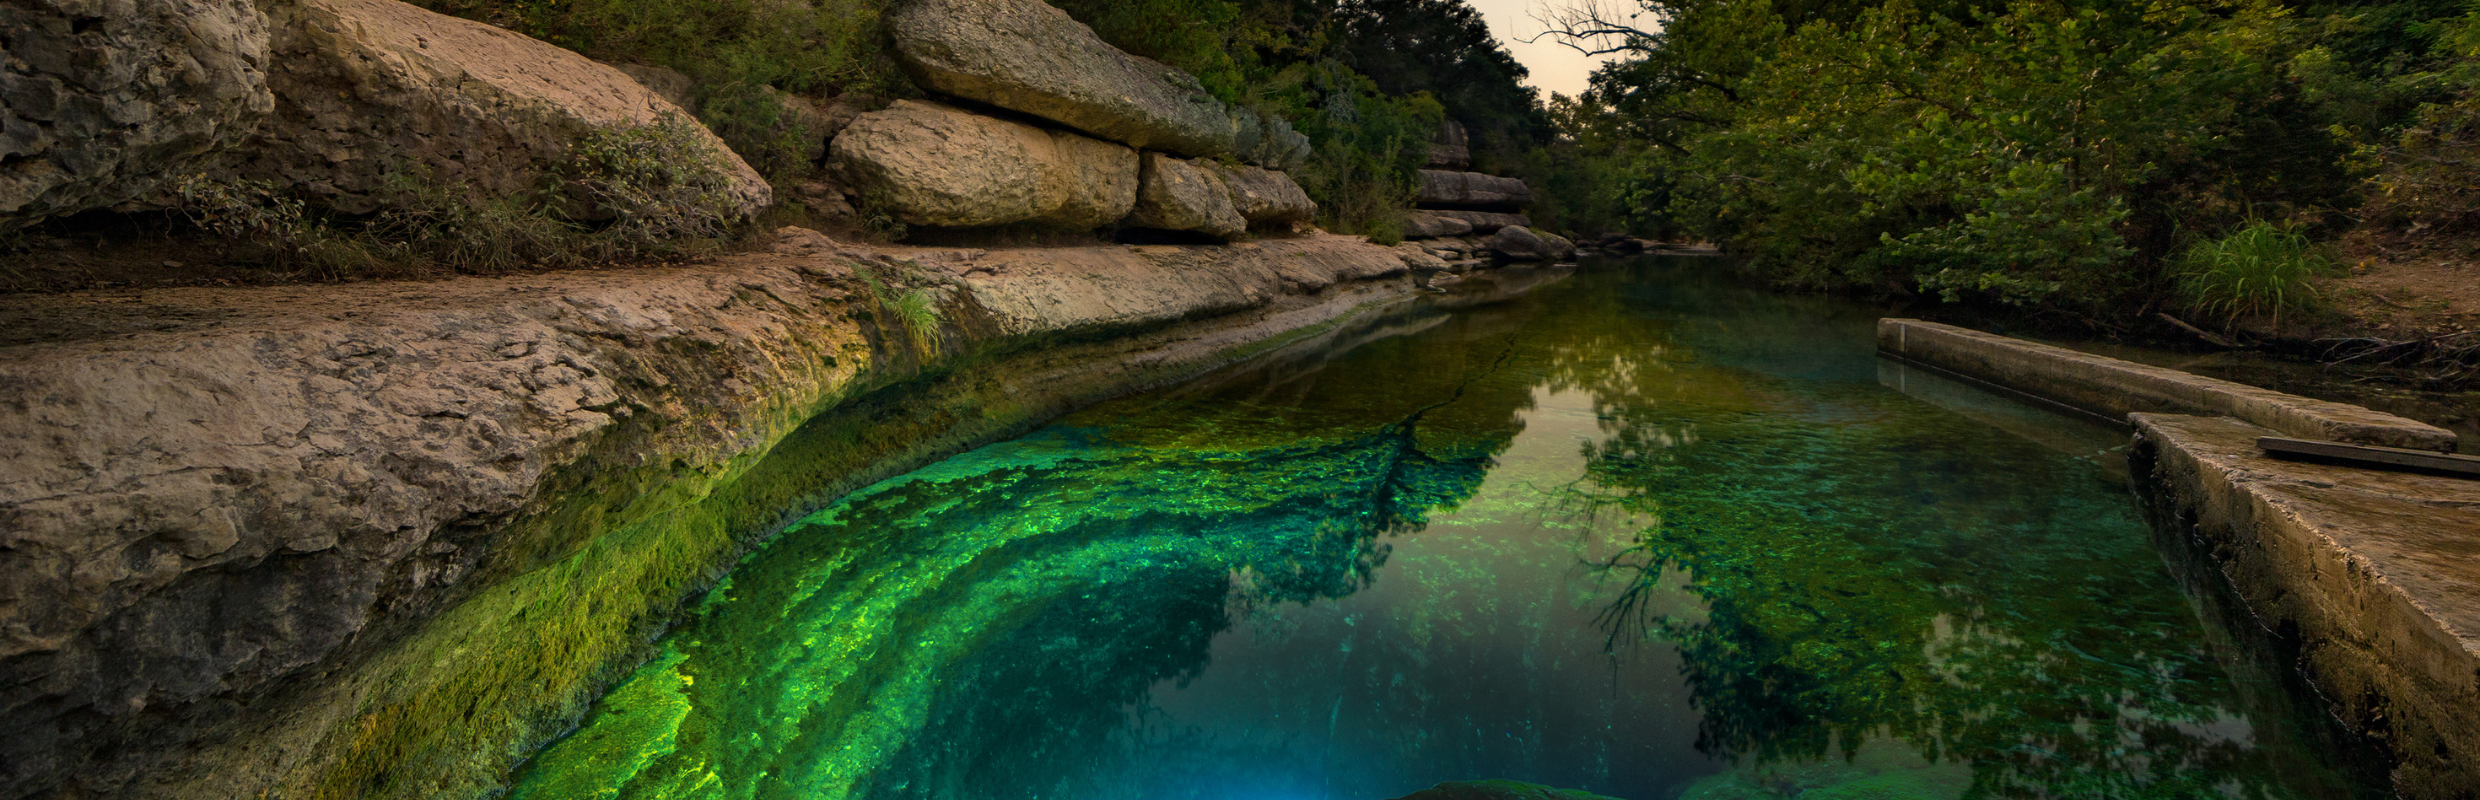 The iconic Hill Country Spring - Jacob's Well - is illuminated by a scuba diver at sunset.